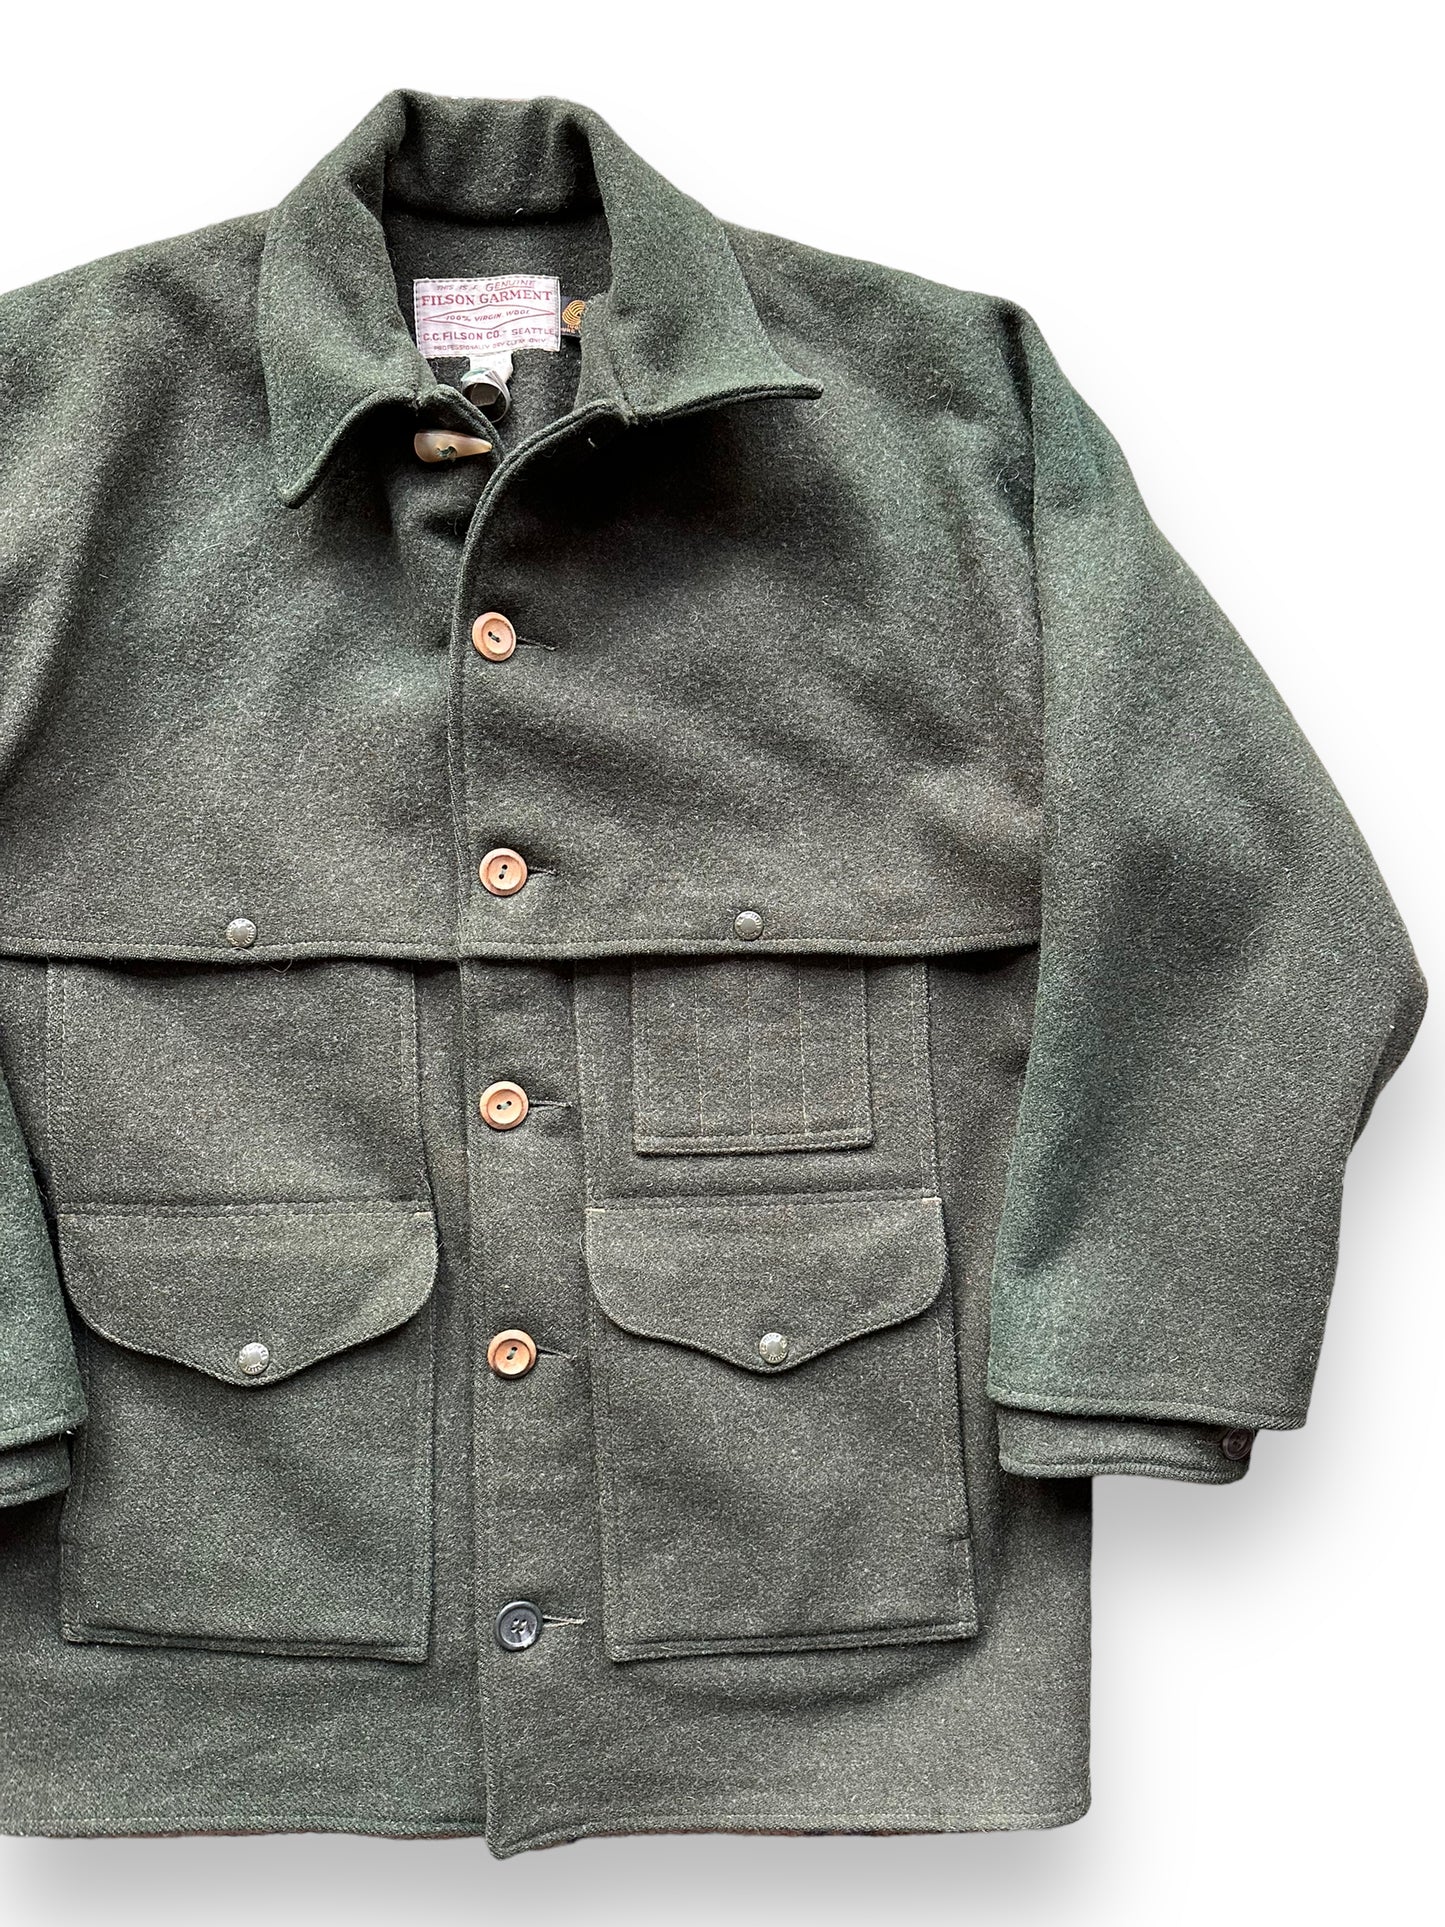 Front Left View of Vintage Filson Forest Green Double Mackinaw Cruiser SZ 46 XL |  Barn Owl Vintage Goods | Vintage Workwear Seattle